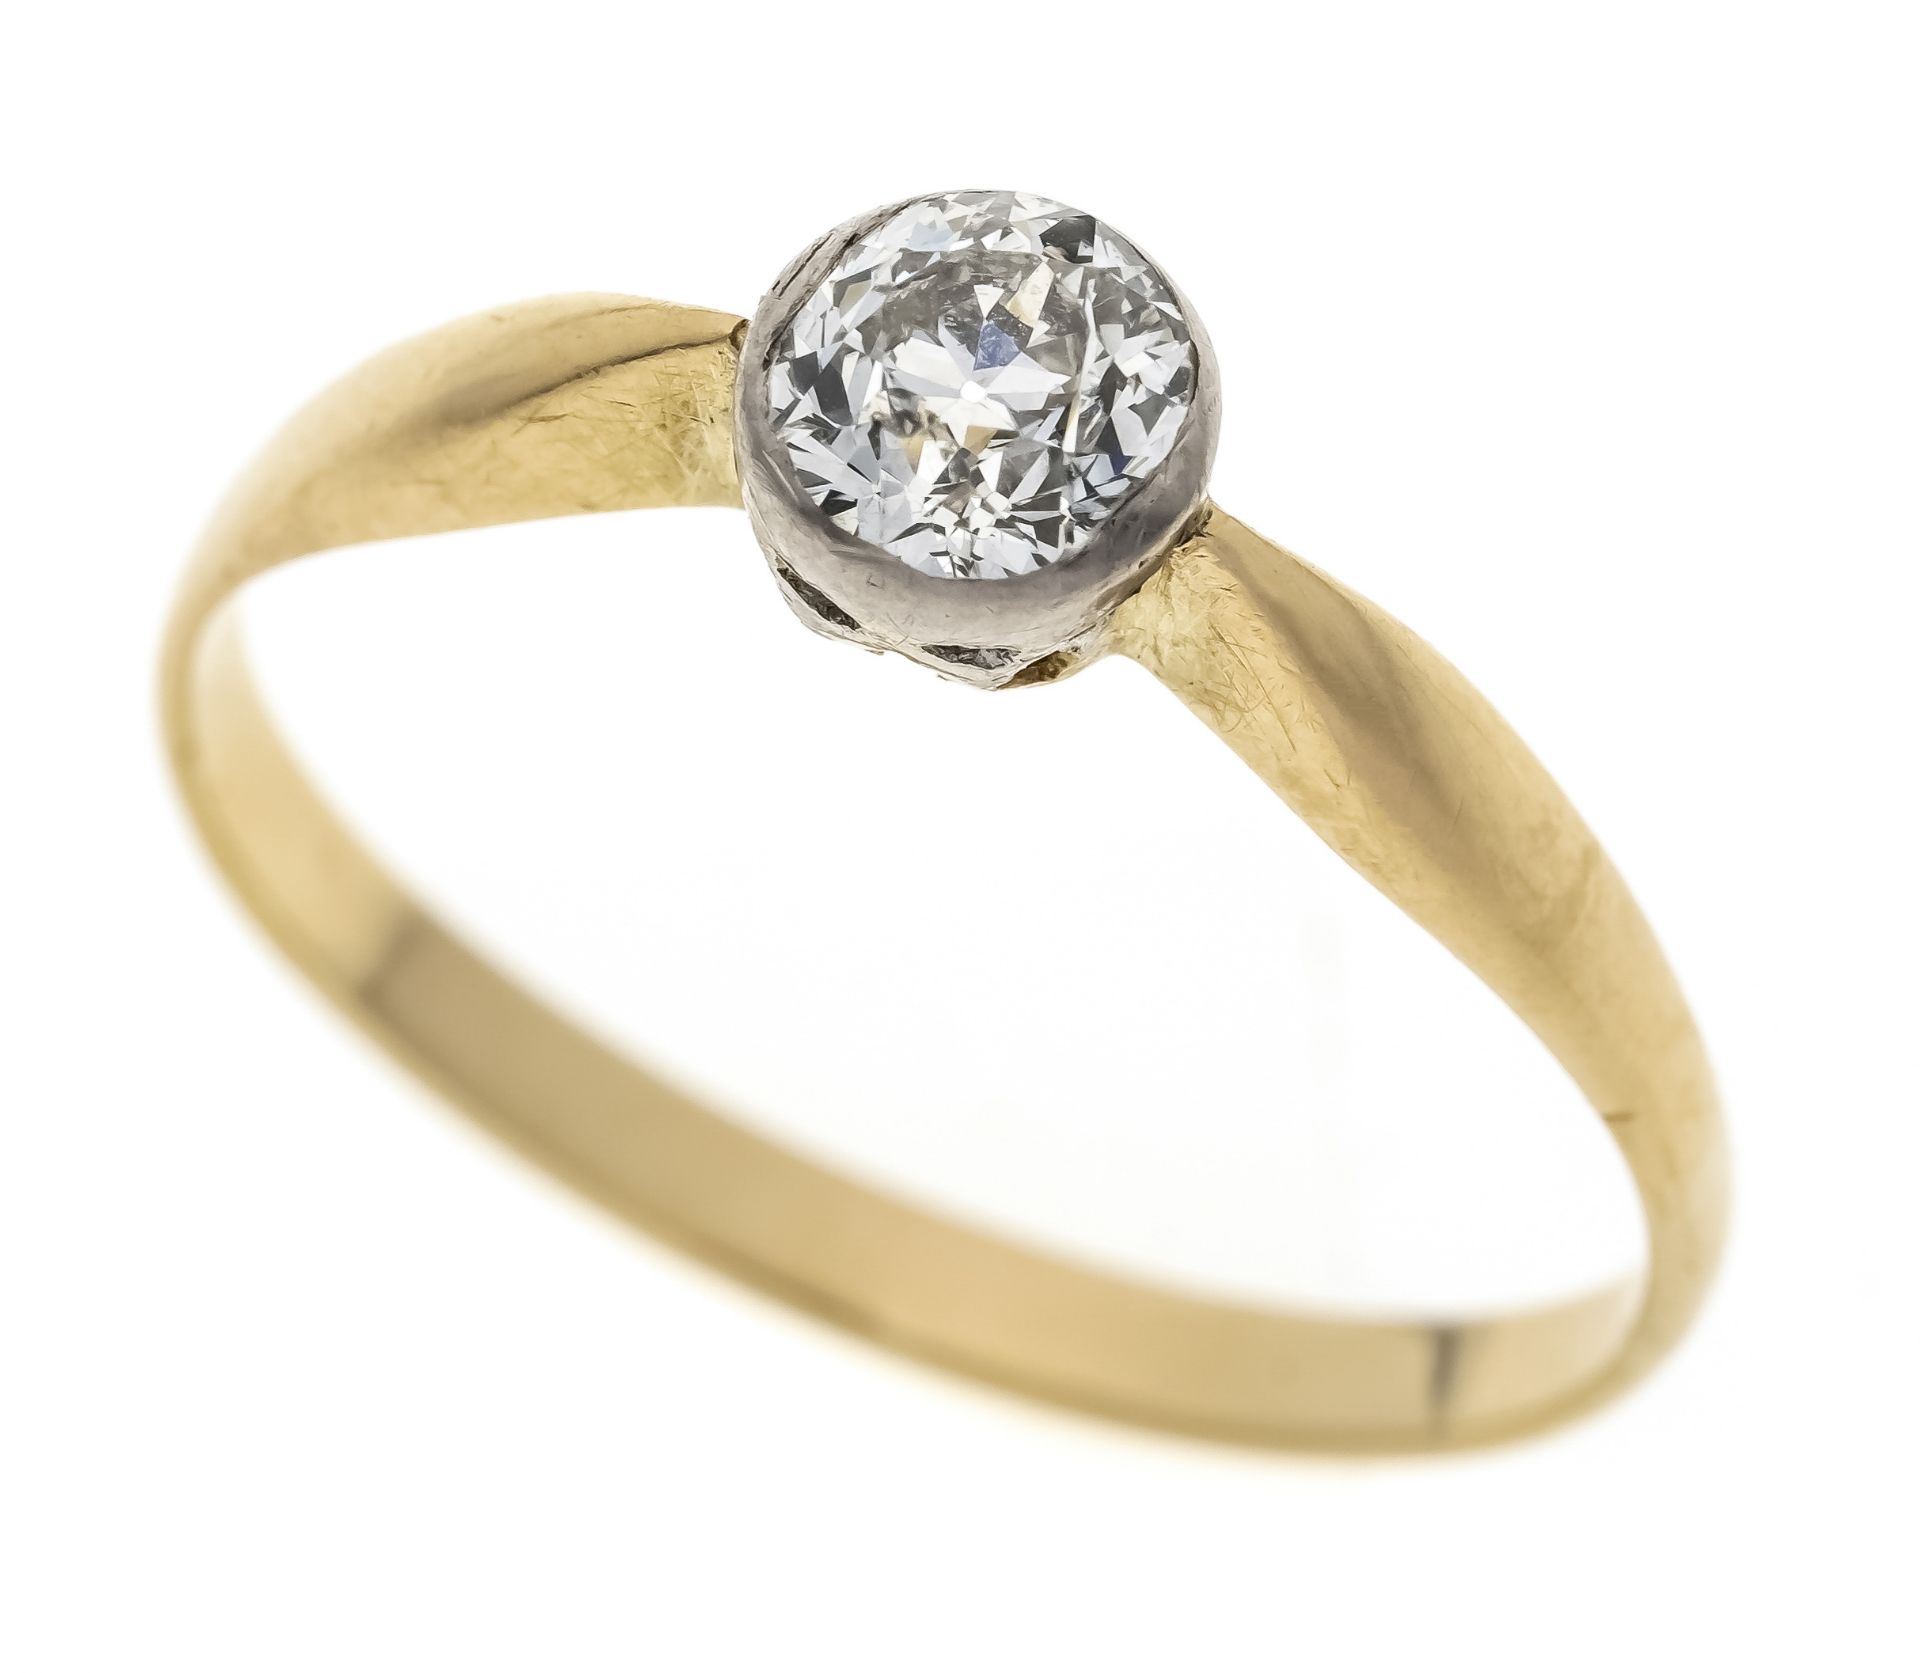 Old-cut diamond ring GG/WG 585/000 unmarked, tested, with one old-cut diamond approx. 0.60 ct